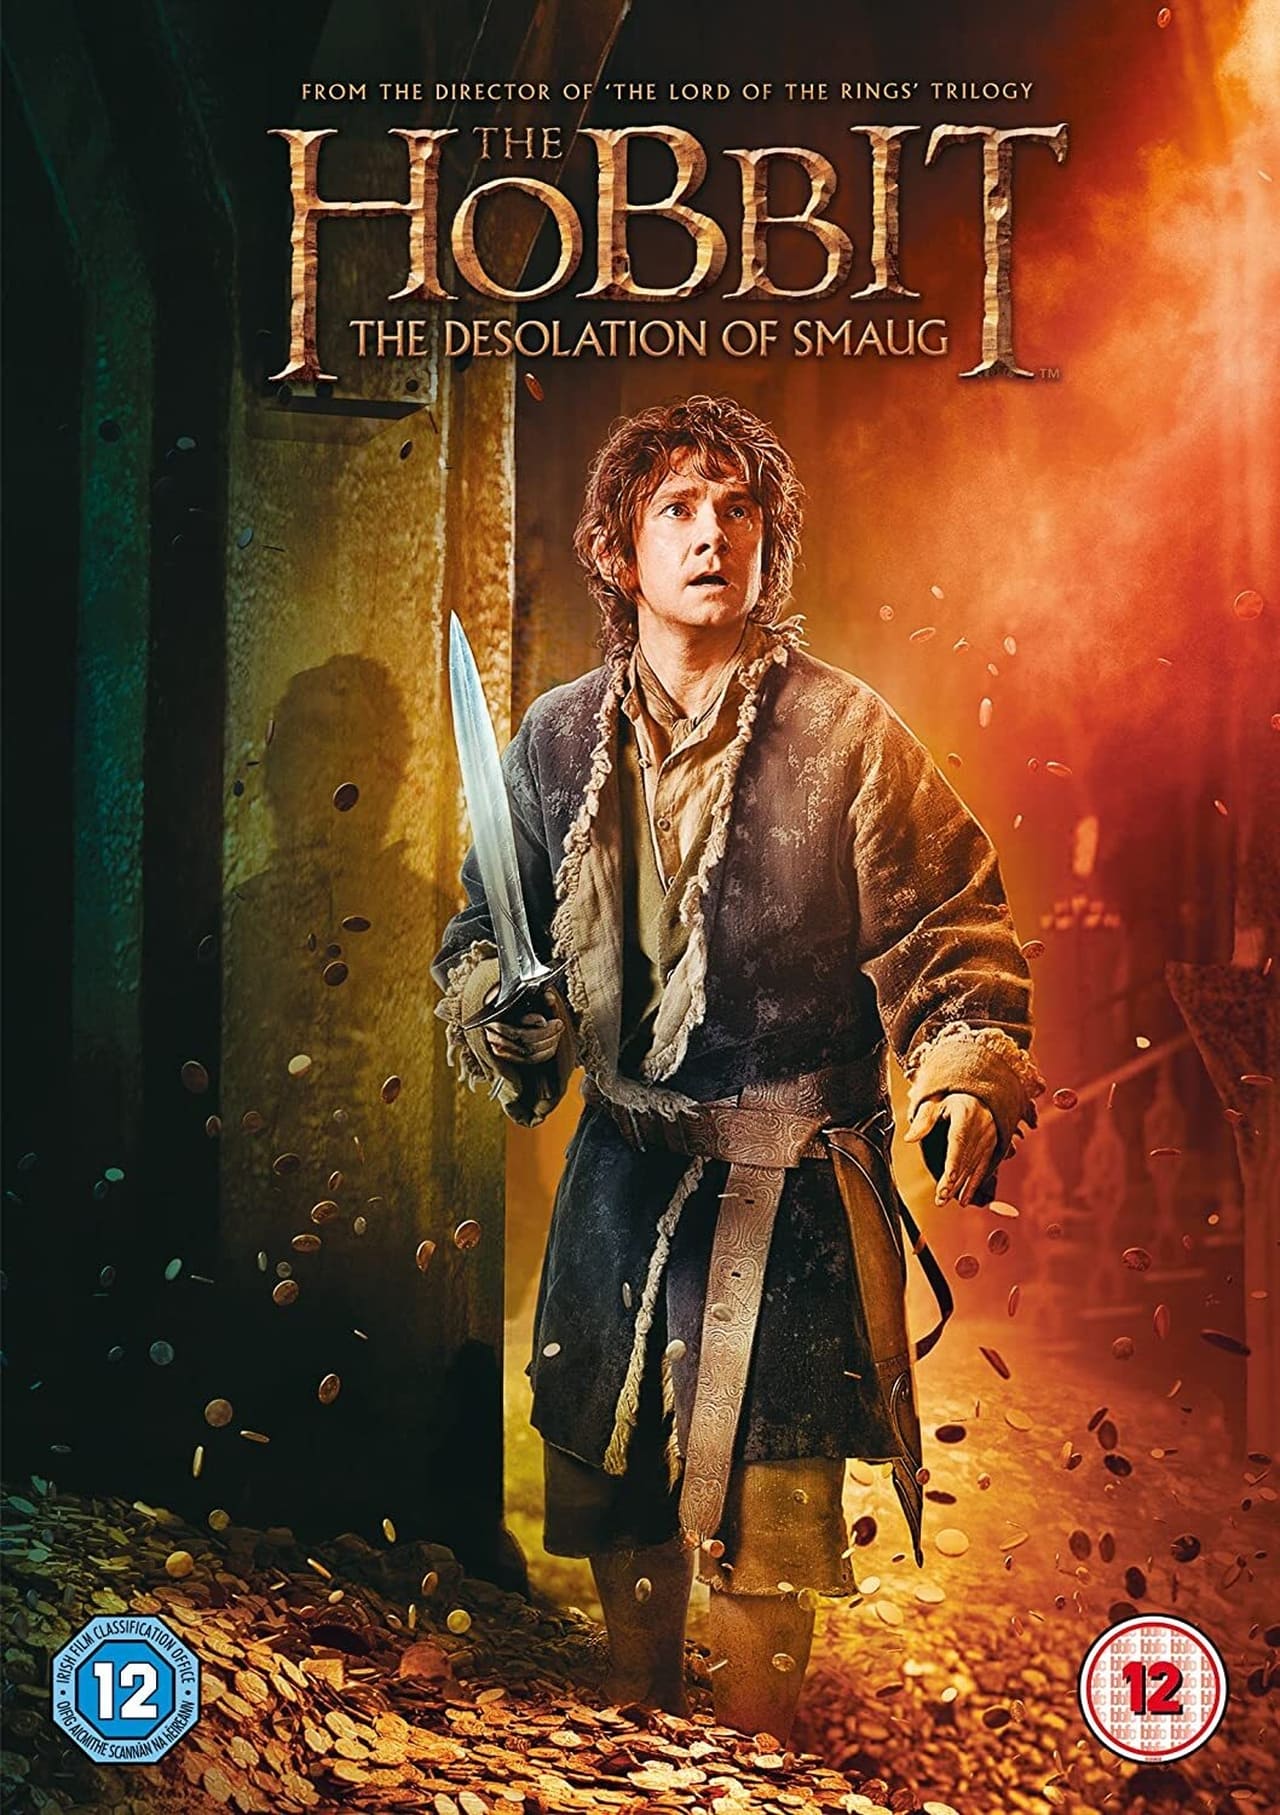 The Hobbit: The Desolation of Smaug (2013) Theatrical Cut 768Kbps 23.976Fps 48Khz 5.1Ch BluRay Turkish Audio TAC